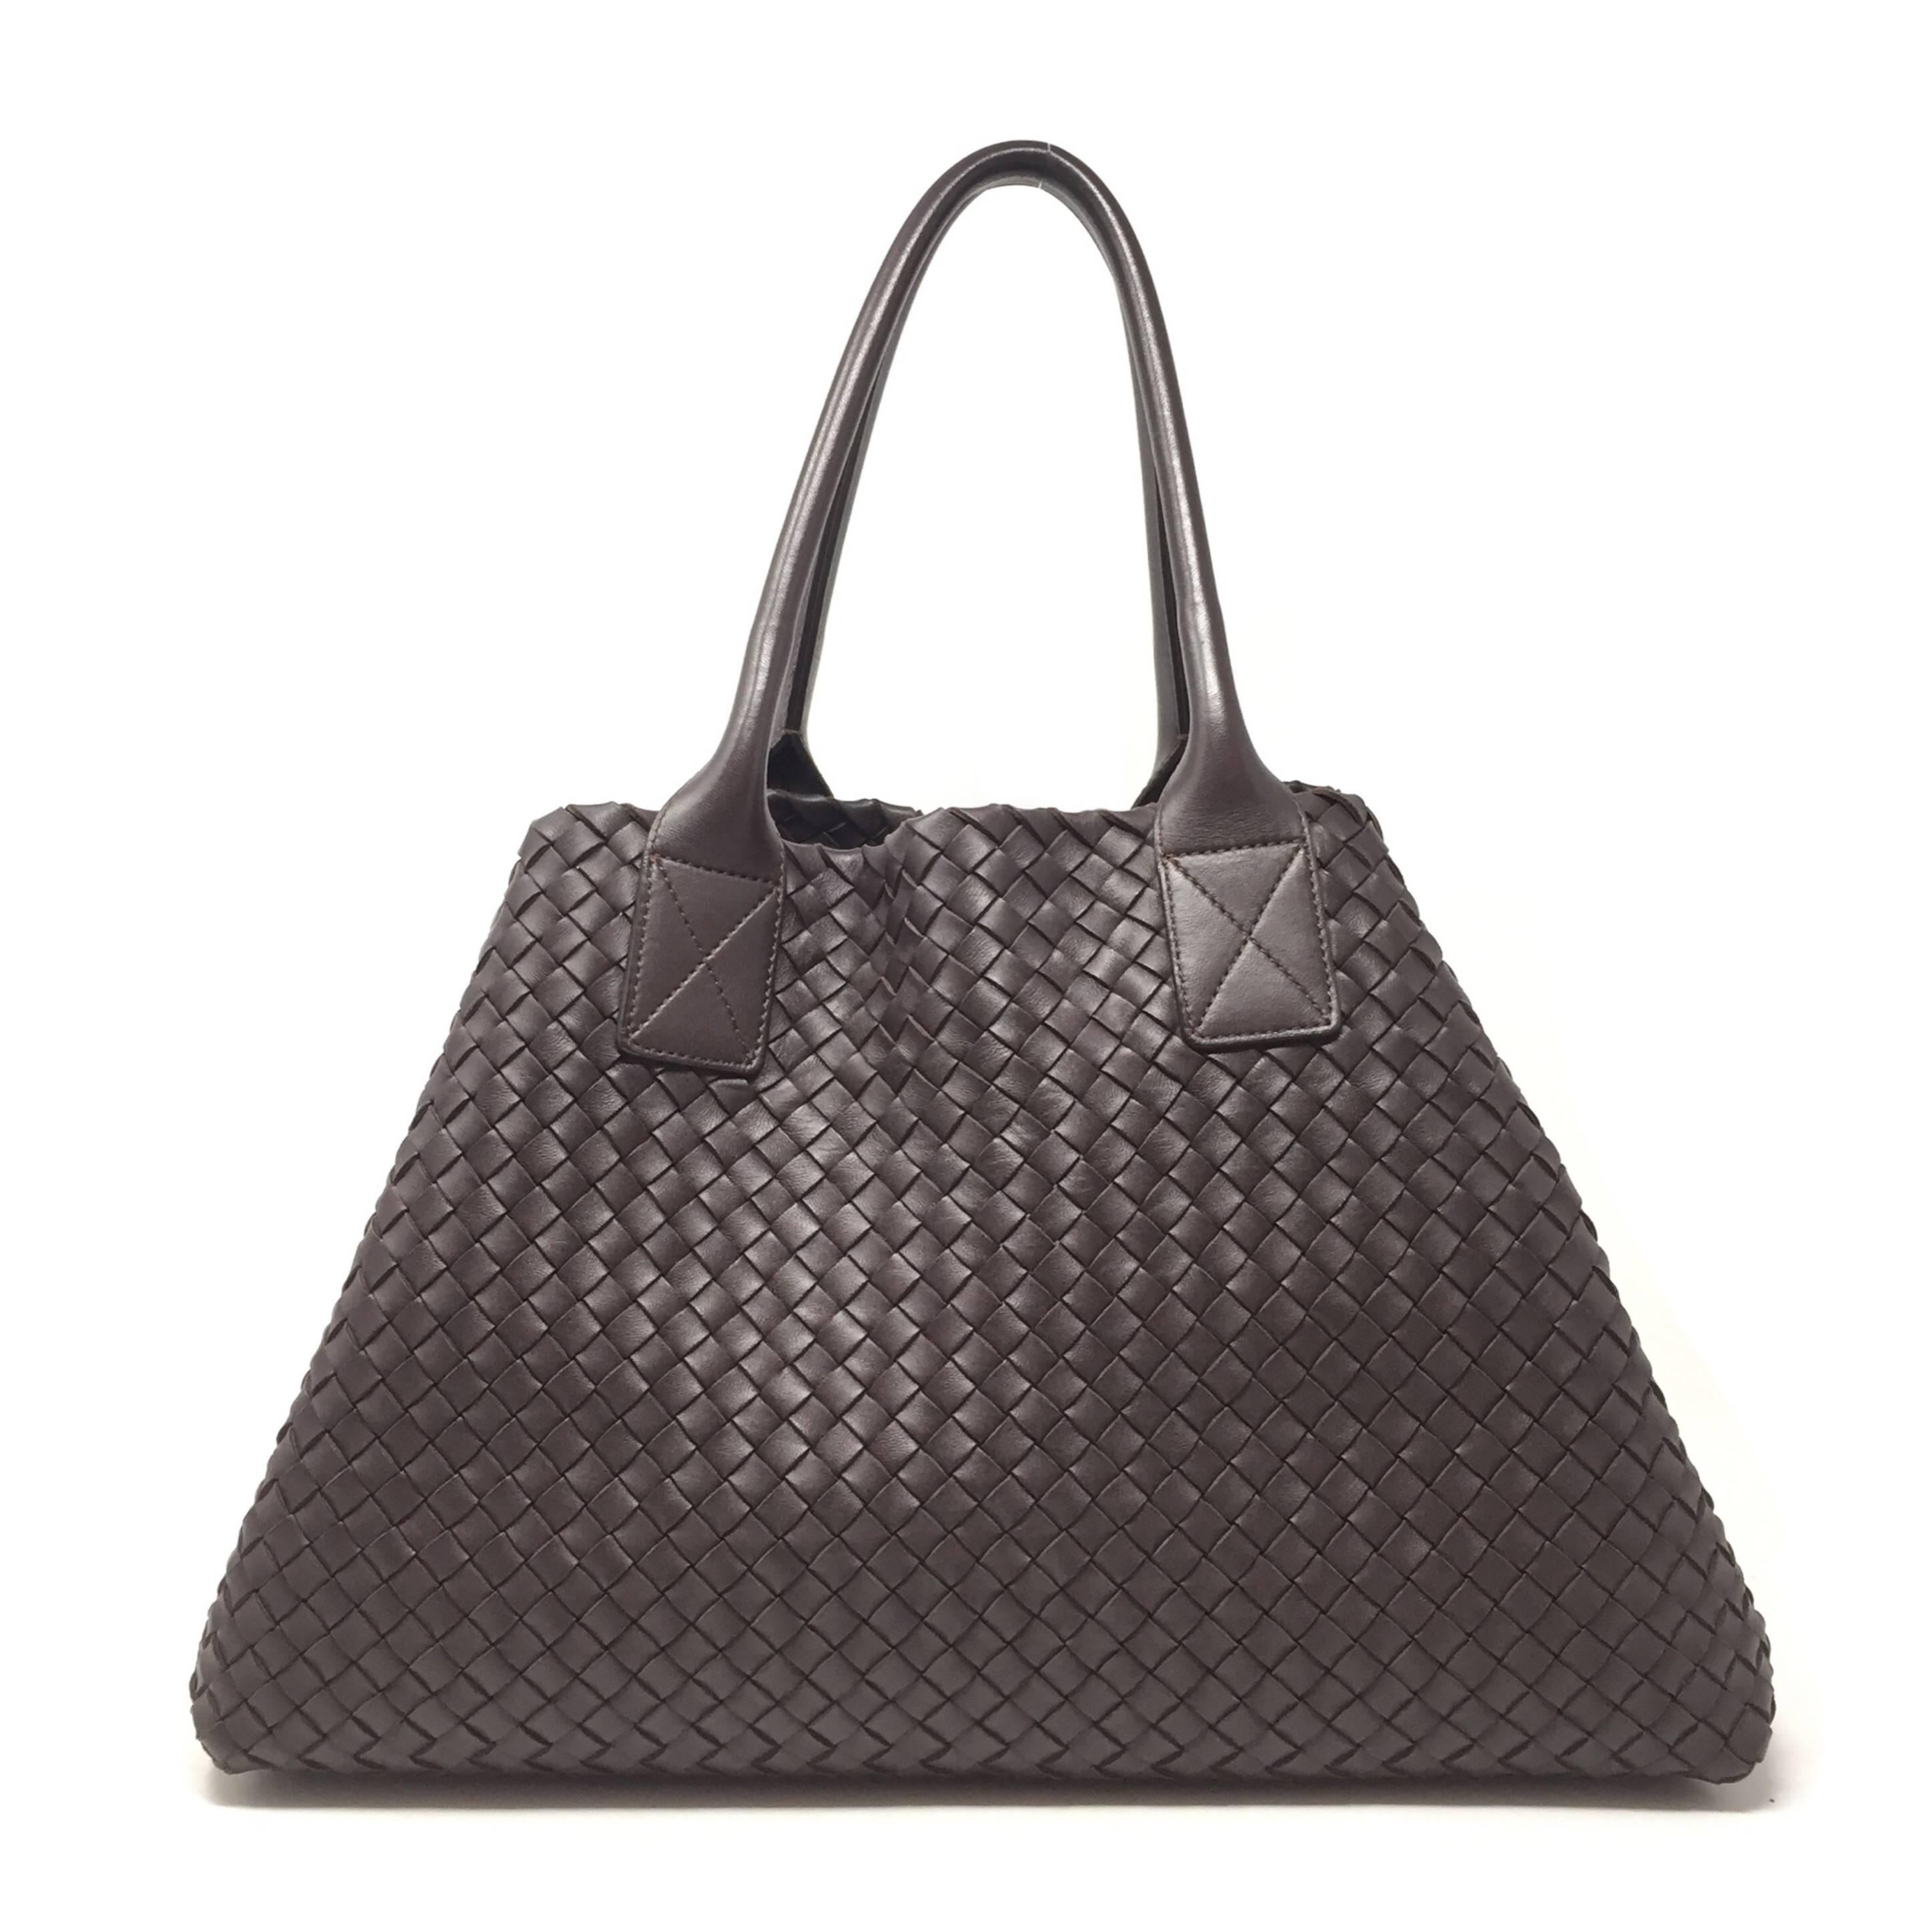 Elegant and understated, the Cabat is Bottega Veneta’s most iconic design a deceptively simple, seamless tote that’s finished as beautifully on the inside as it is on the outside. Designed to be both spacious and lightweight, this version is